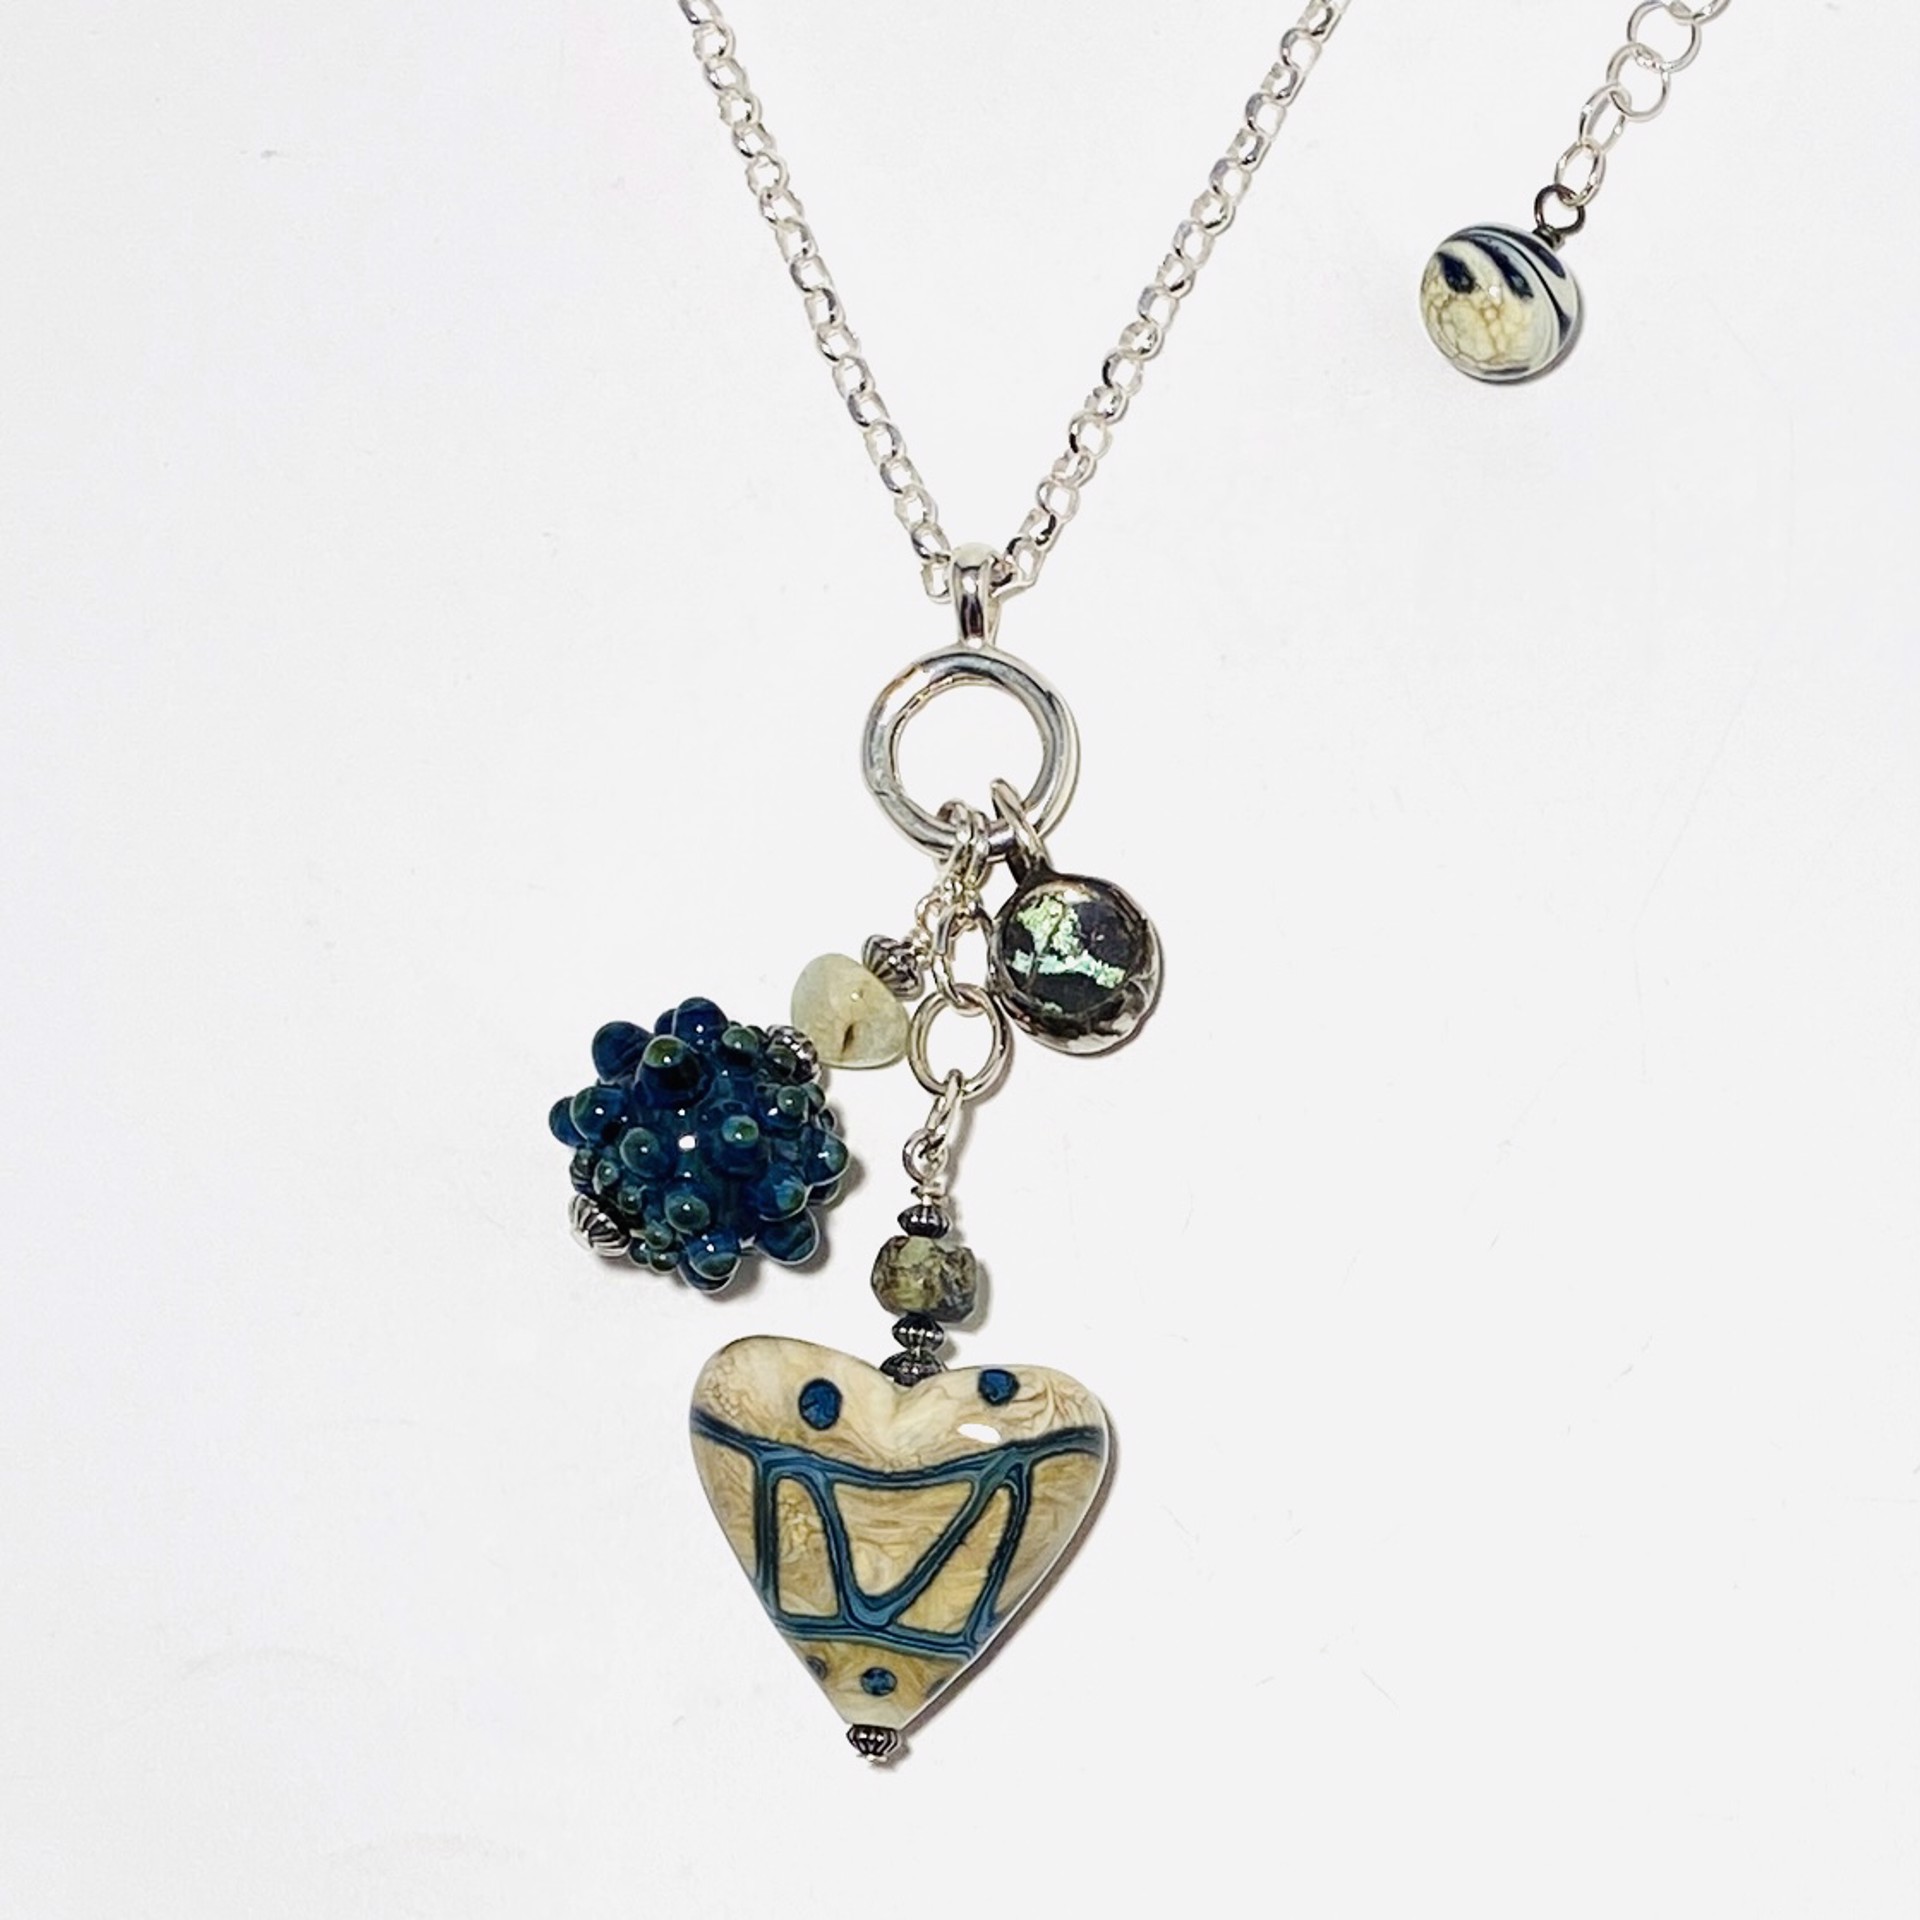 Avario Okamus Heart, Small Butterfly Wing, Dark Blue Dots, Charms Trio on Diamond Cut Sterling Necklace with Charm Holder LS23-13A by Linda Sacra